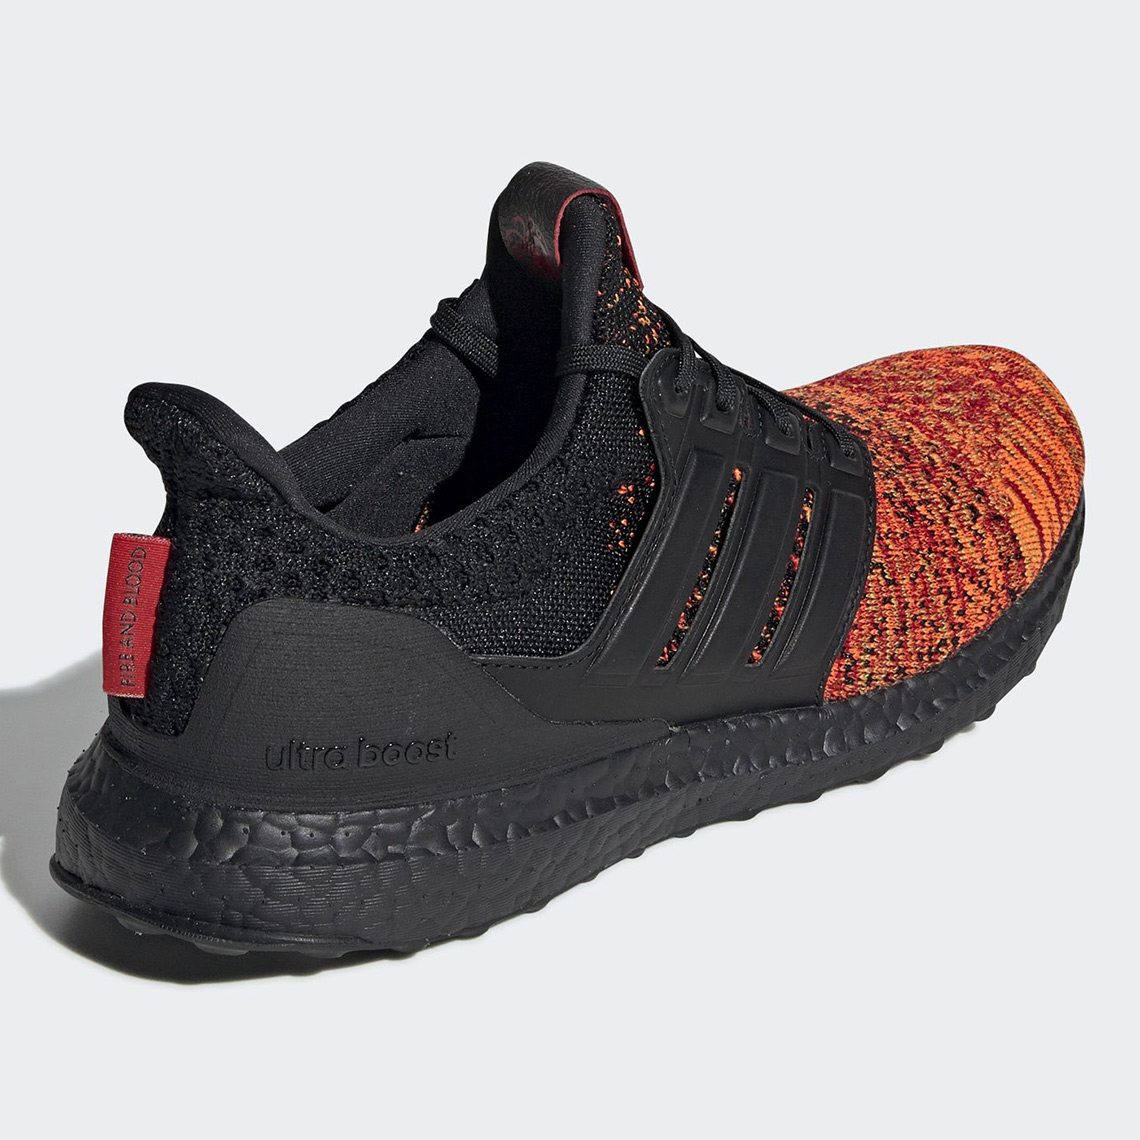 adidas ultra boost game of thrones shoes